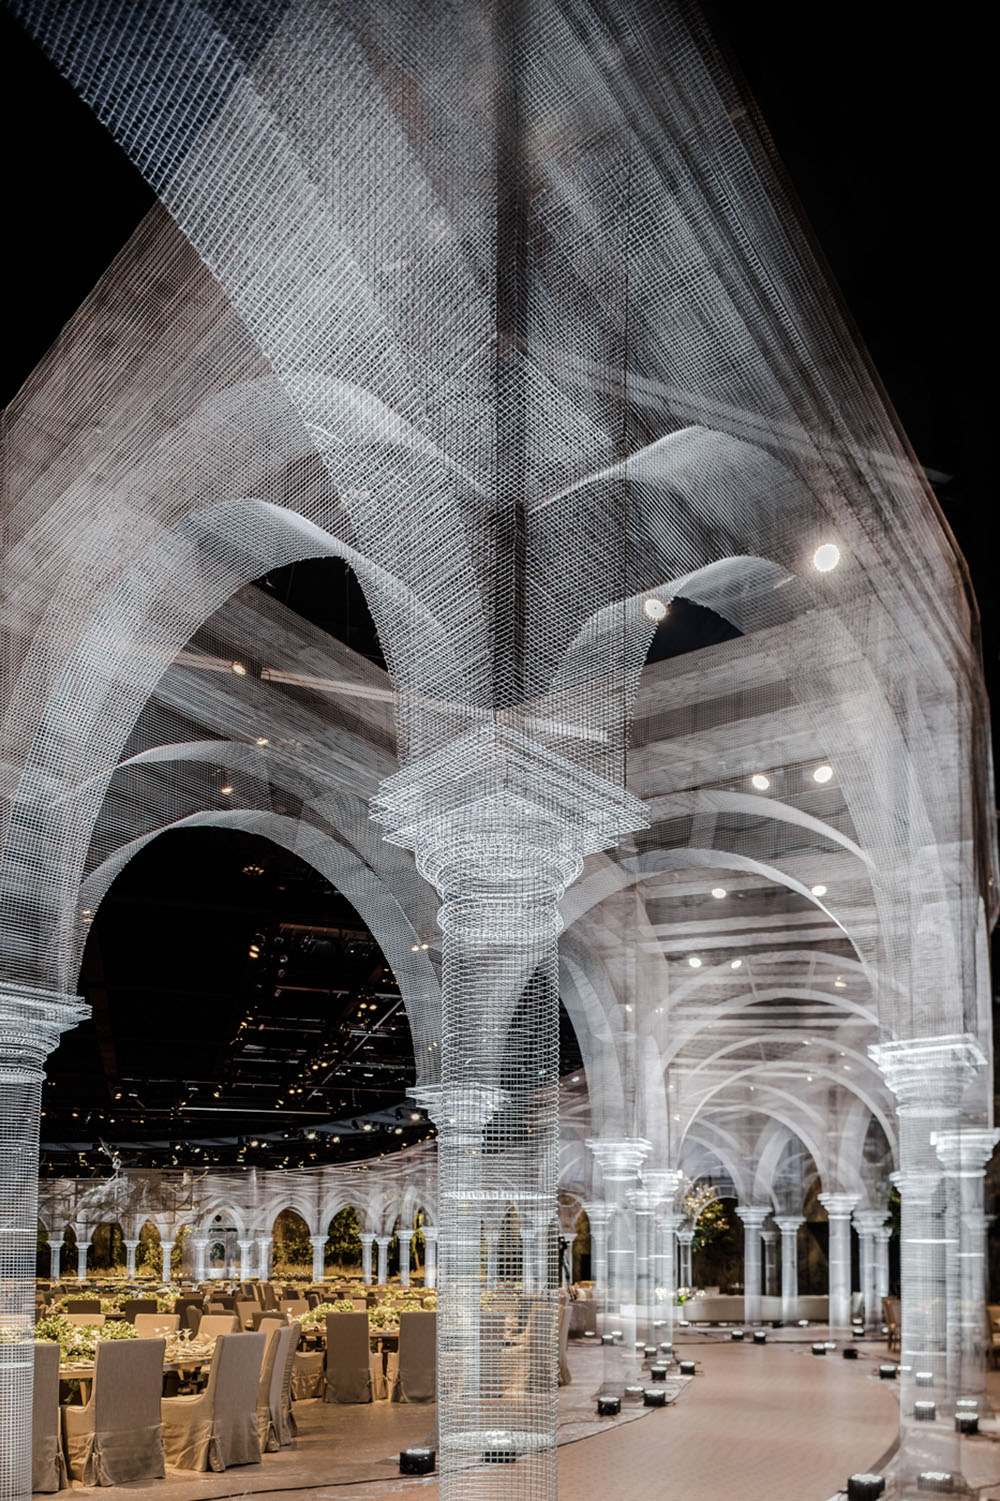 An Expansive Pavilion of Architectural Elements Constructed from Wire Mesh by Edoardo Tresoldi